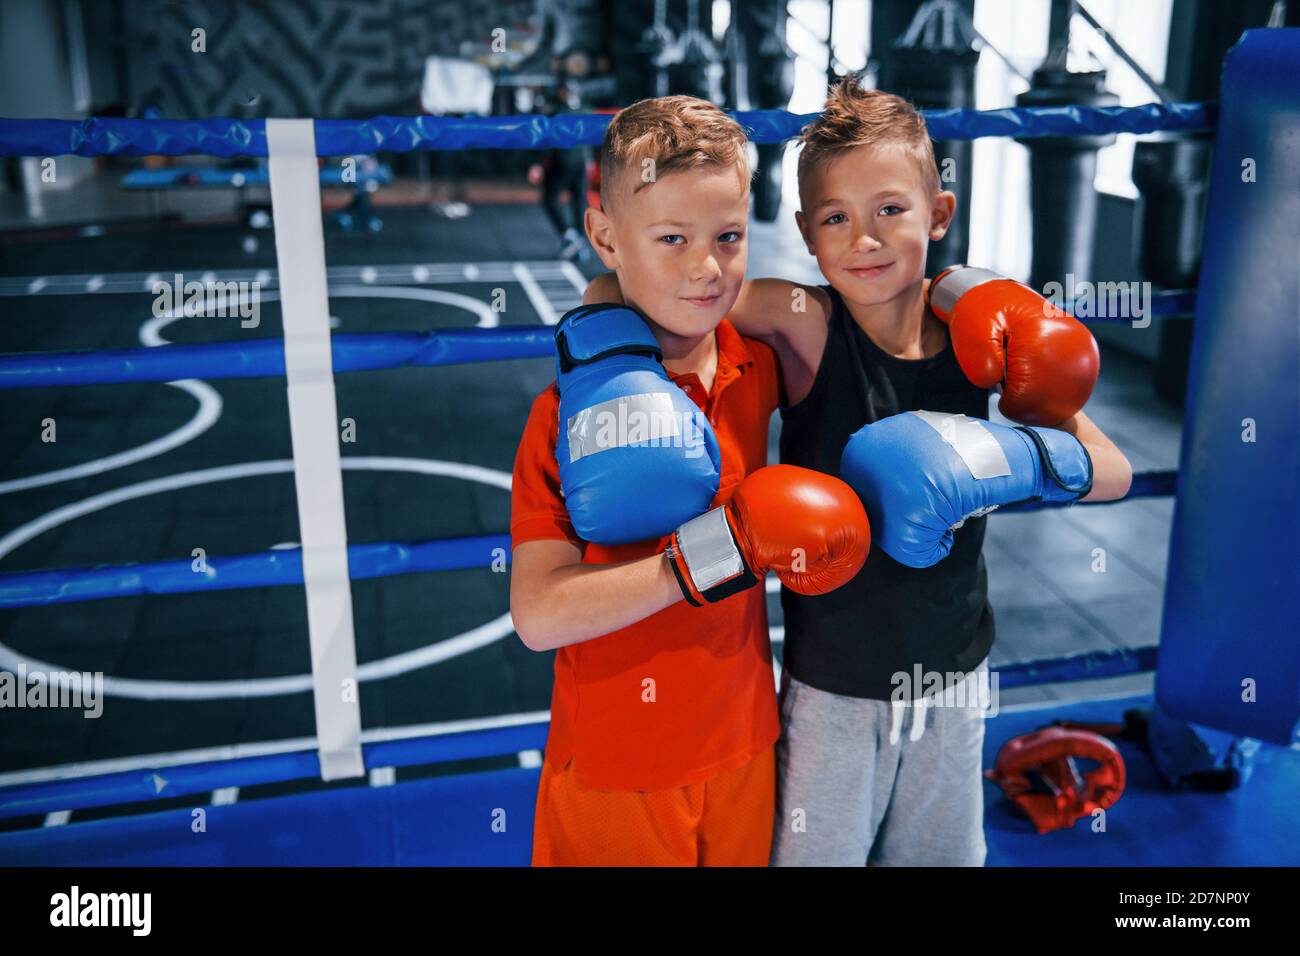 Portrait of two young boys in protective gloves standing together on boxing ring Stock Photo